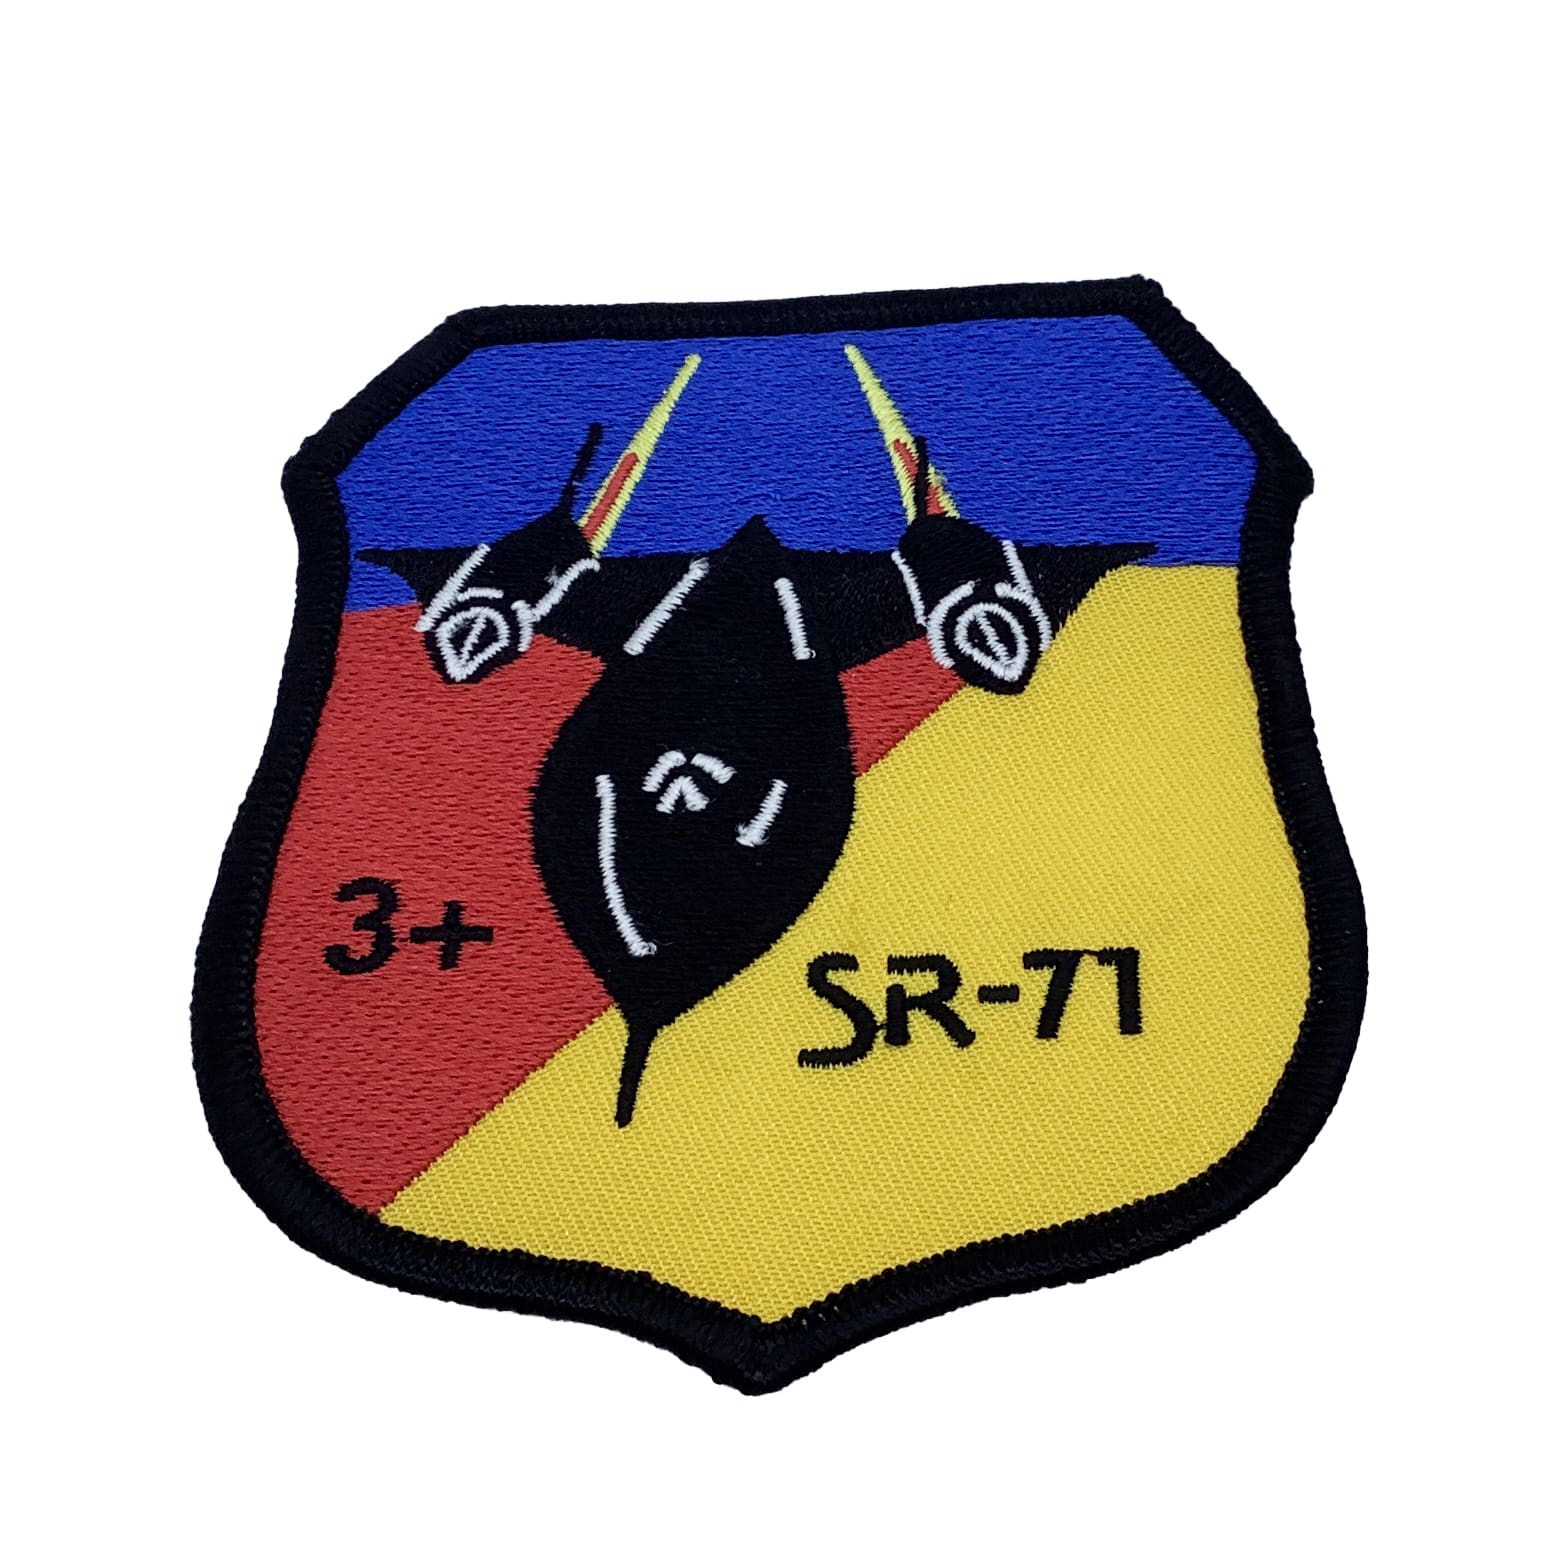 MARCH 3 SR-71 Patch – With Hook and Loop